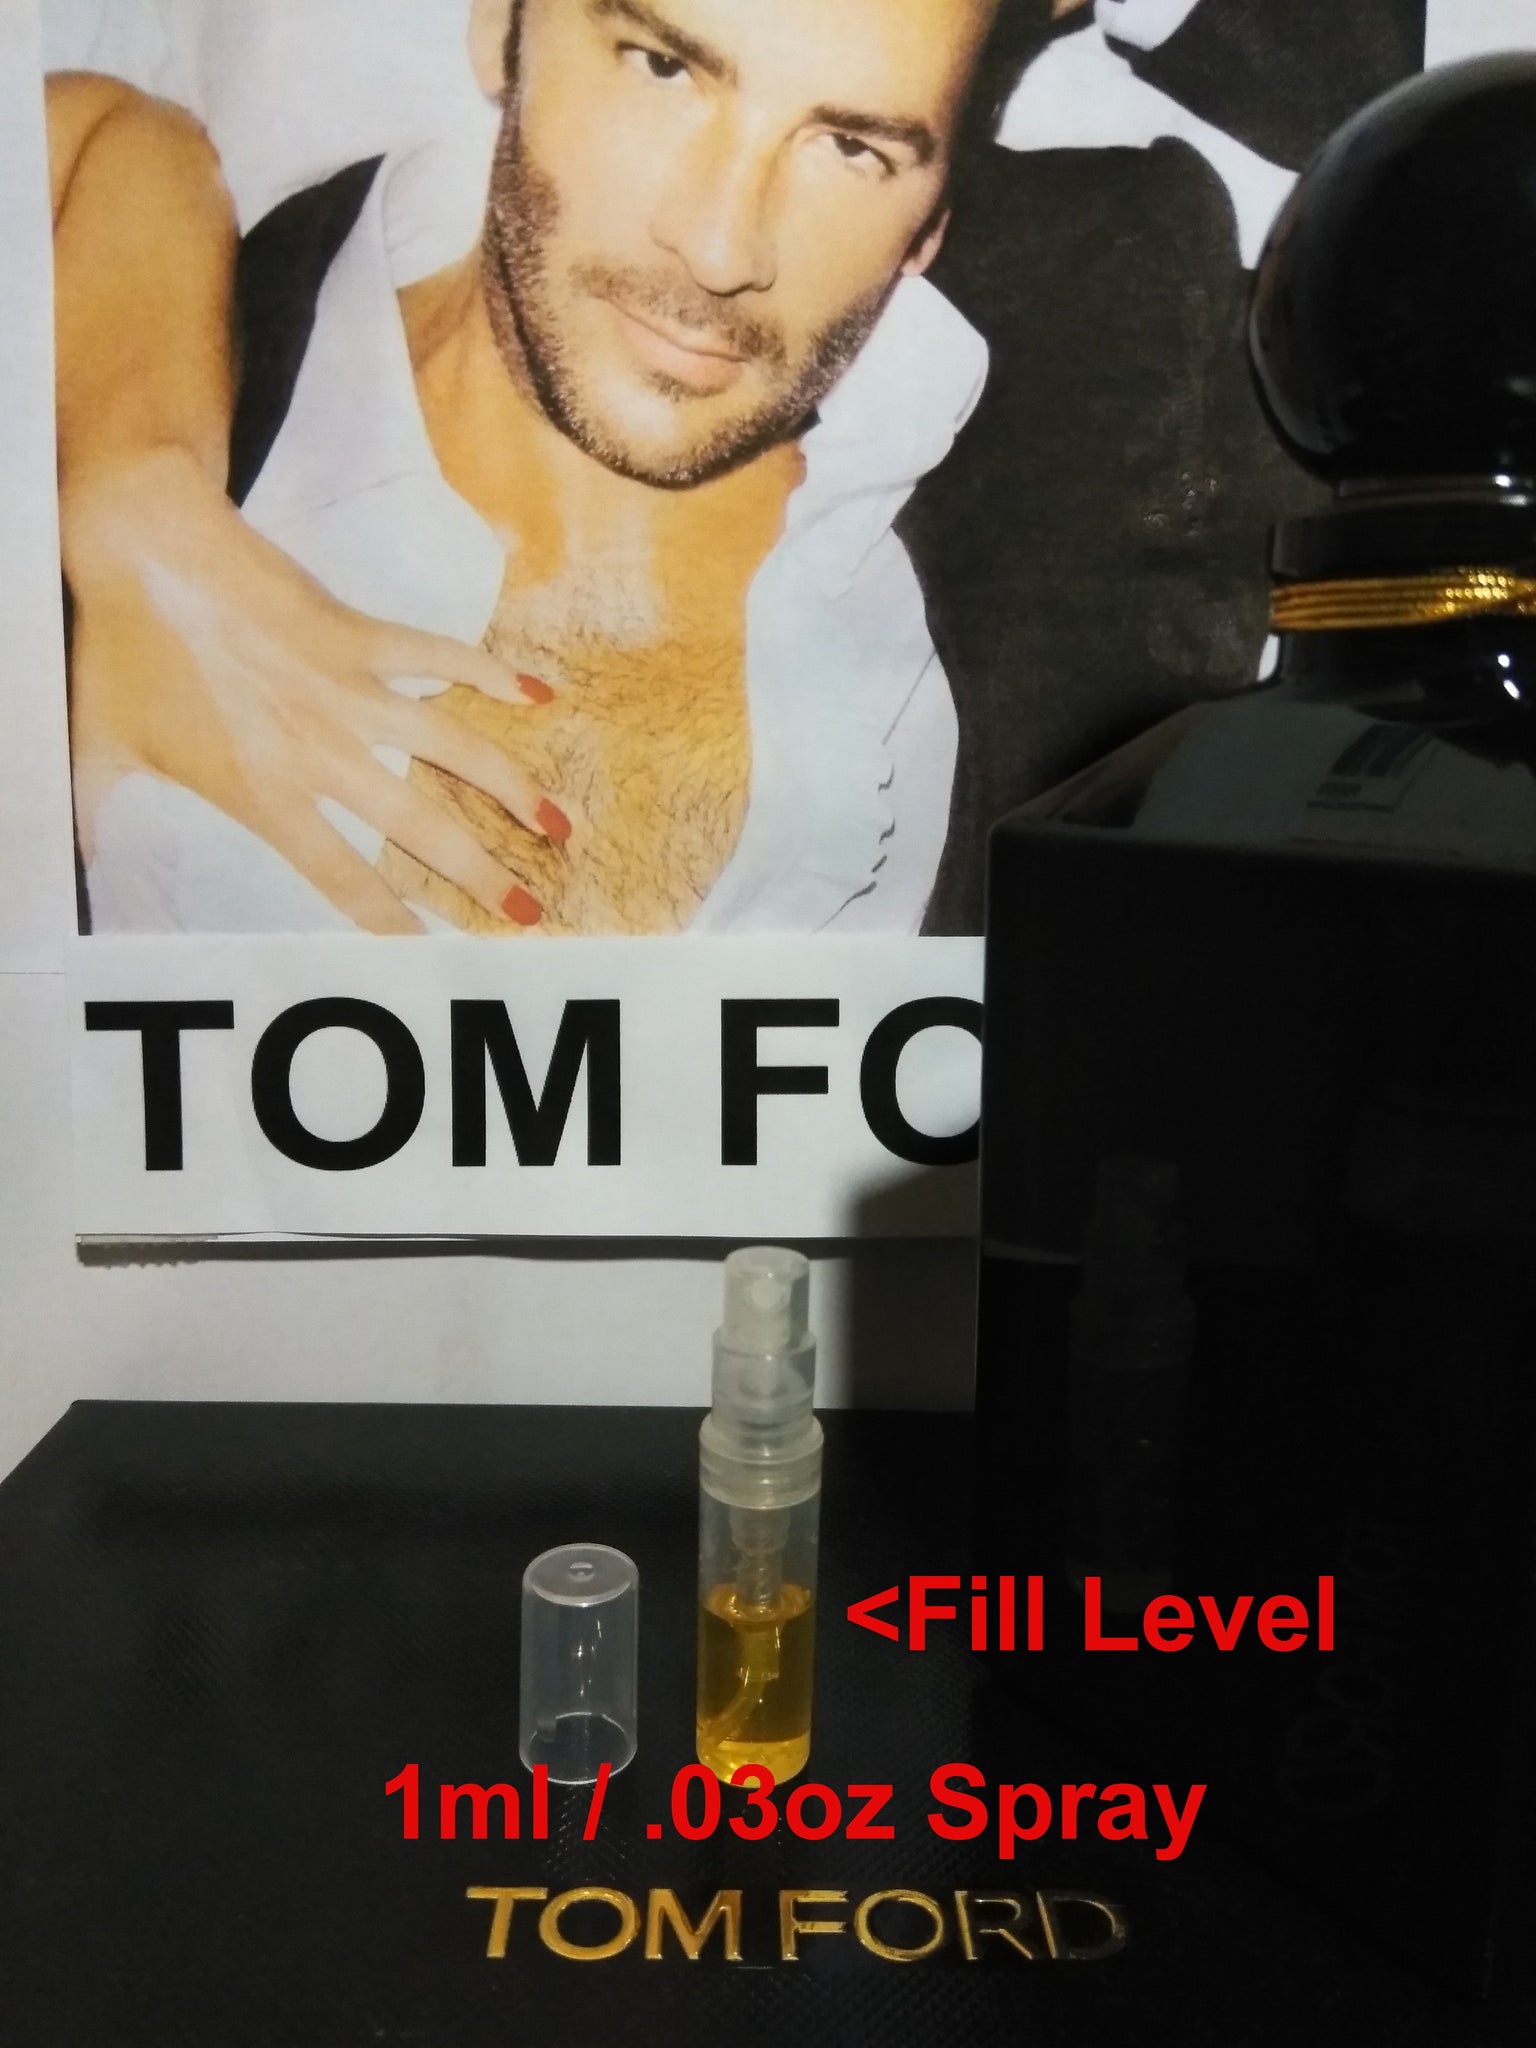 Lost Cherry Authentic Tom Ford Perfume Samples – TomFordPerfumeSamples